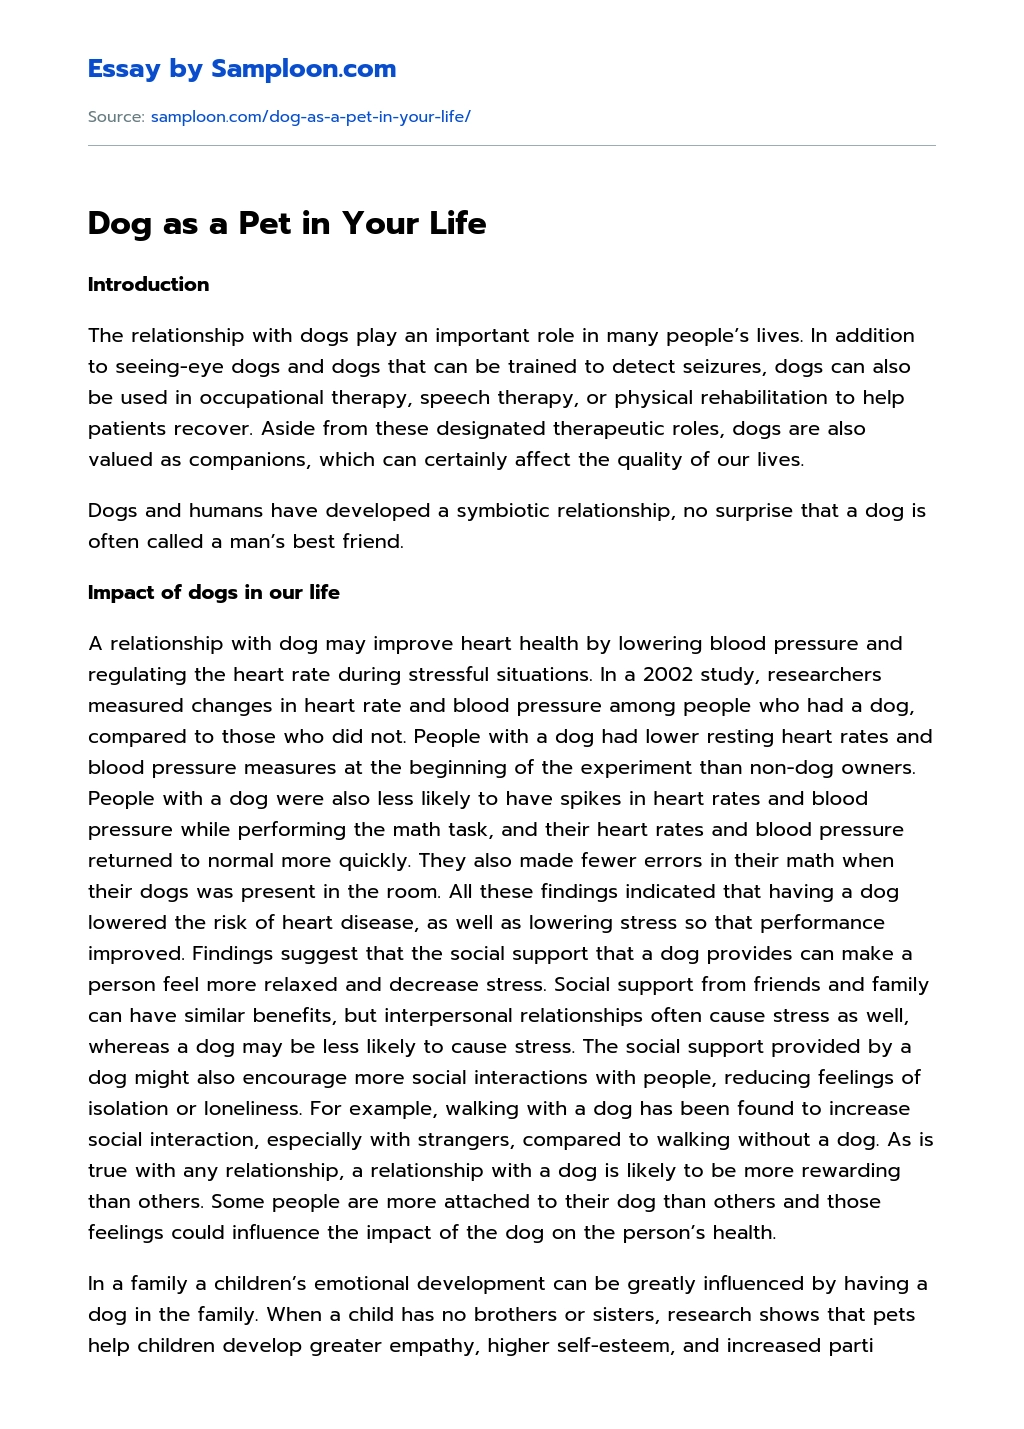 Dog as a Pet in Your Life Personal Essay essay